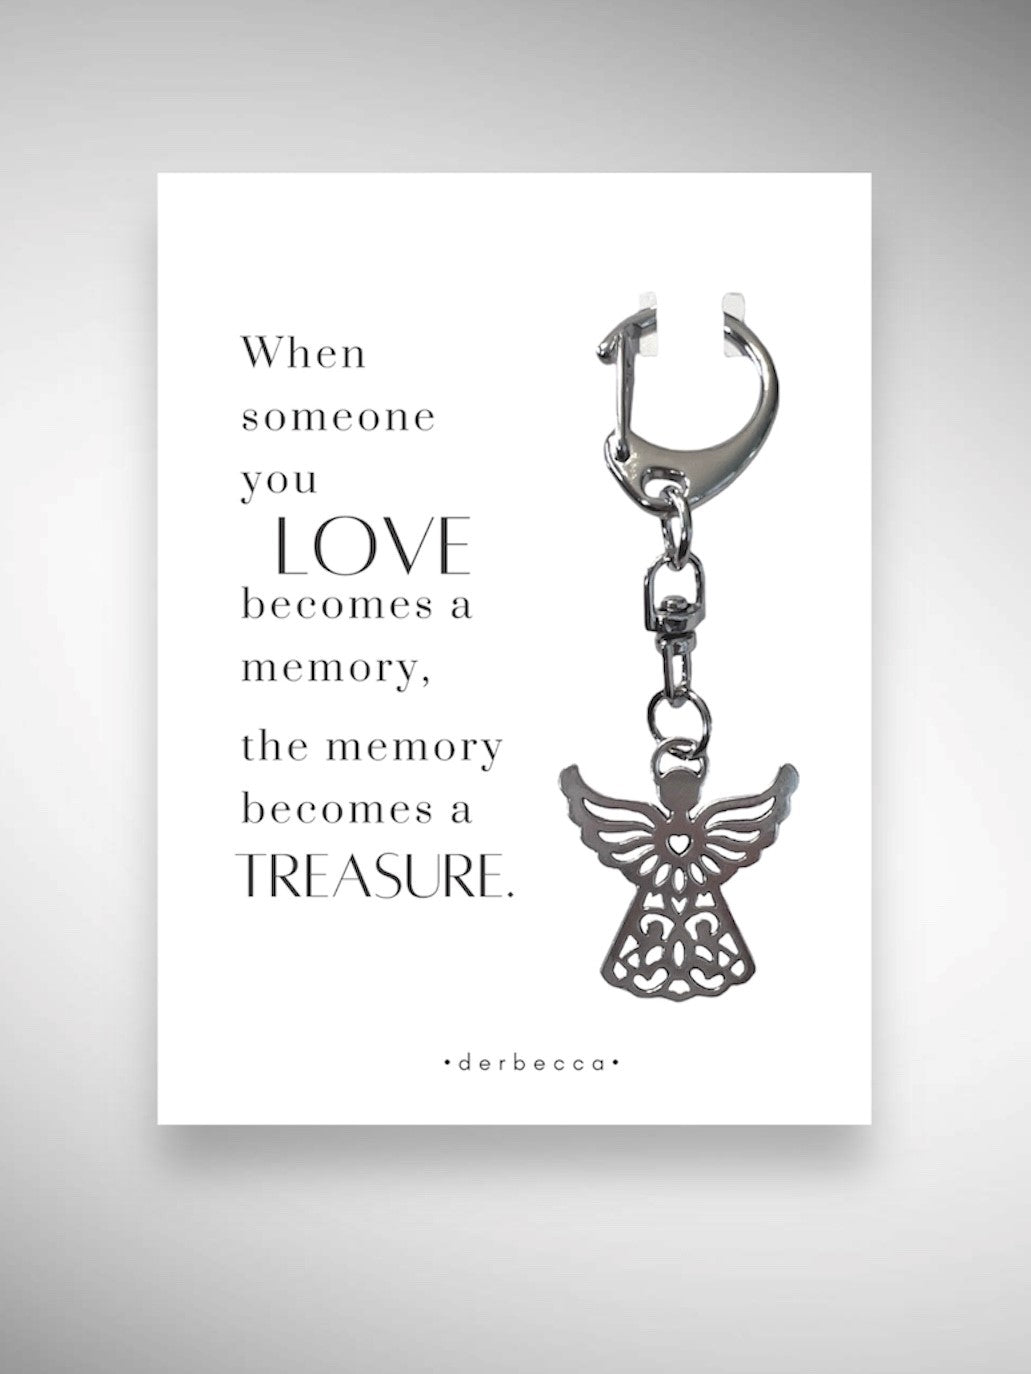 Angel Memory Mini Keychain Bag Charm Pendant for Sympathy, Loss, Passing Death of a Loved One with message/poem/verse that reads: When someone you LOVE becomes a memory, the memory becomes a TREASURE.